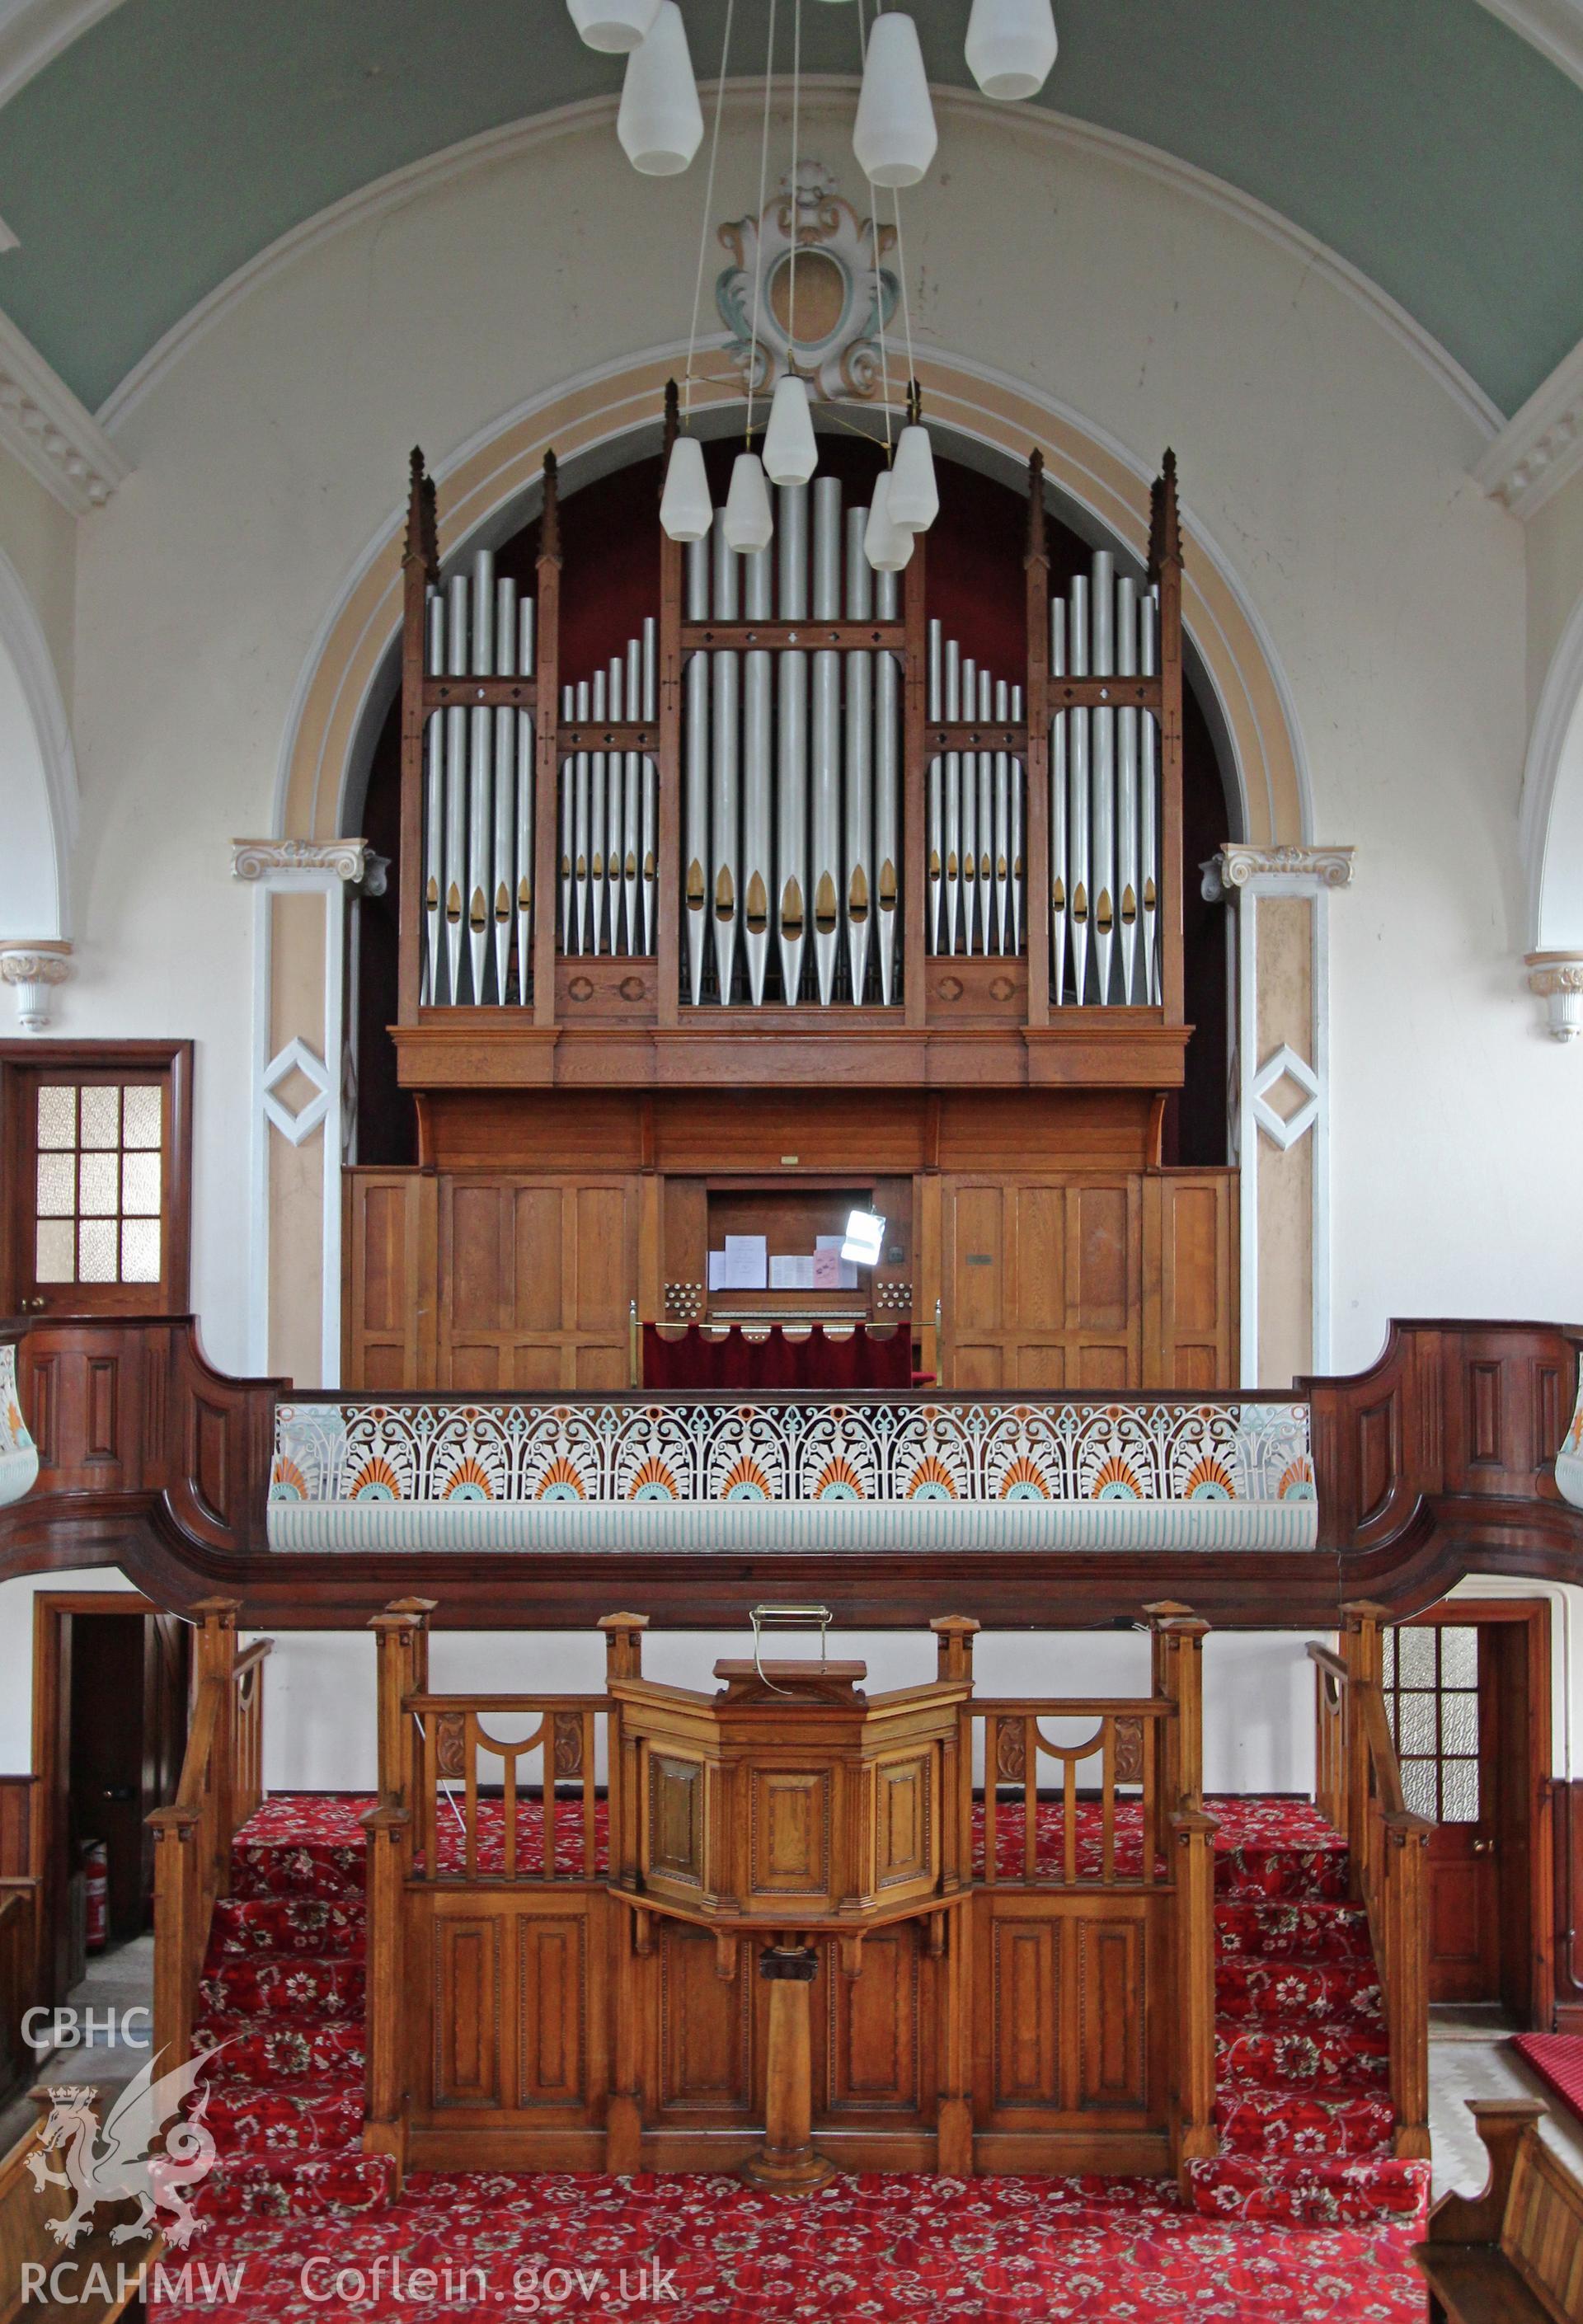 Bethel Independent Chapel, Pen-Clawdd, interior detail of pulpit and organ